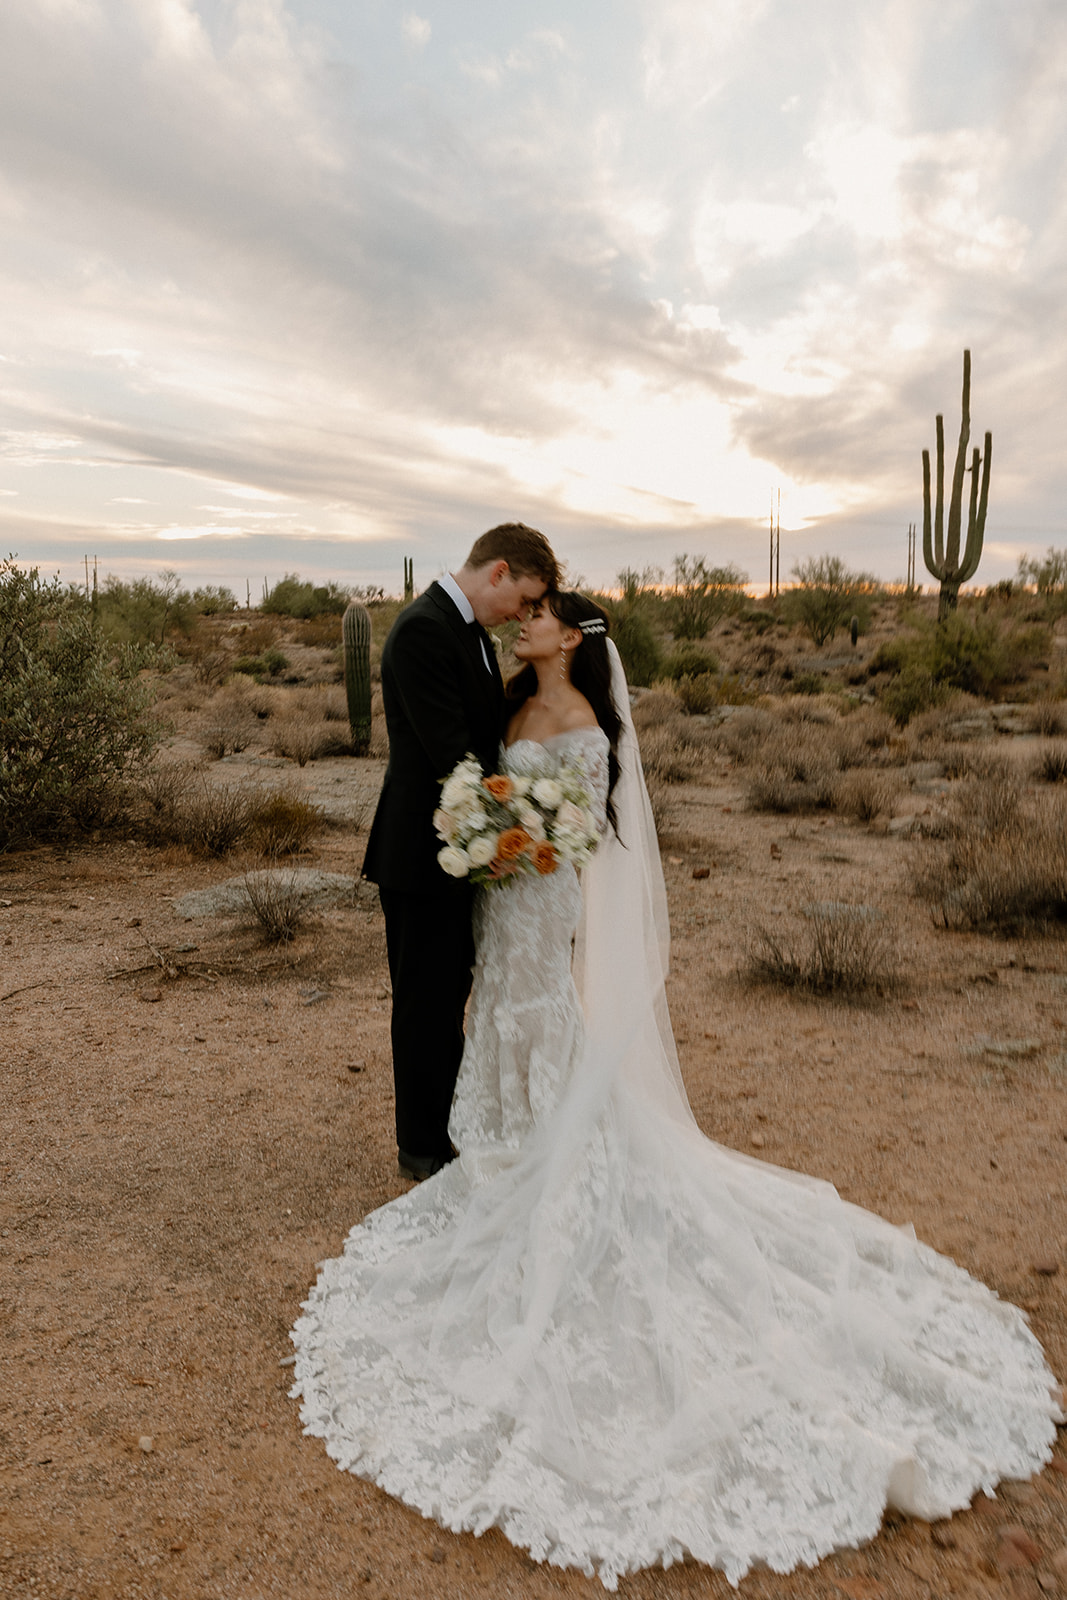 bride and groom pose at golden hour after their dreamy Arizona wedding day